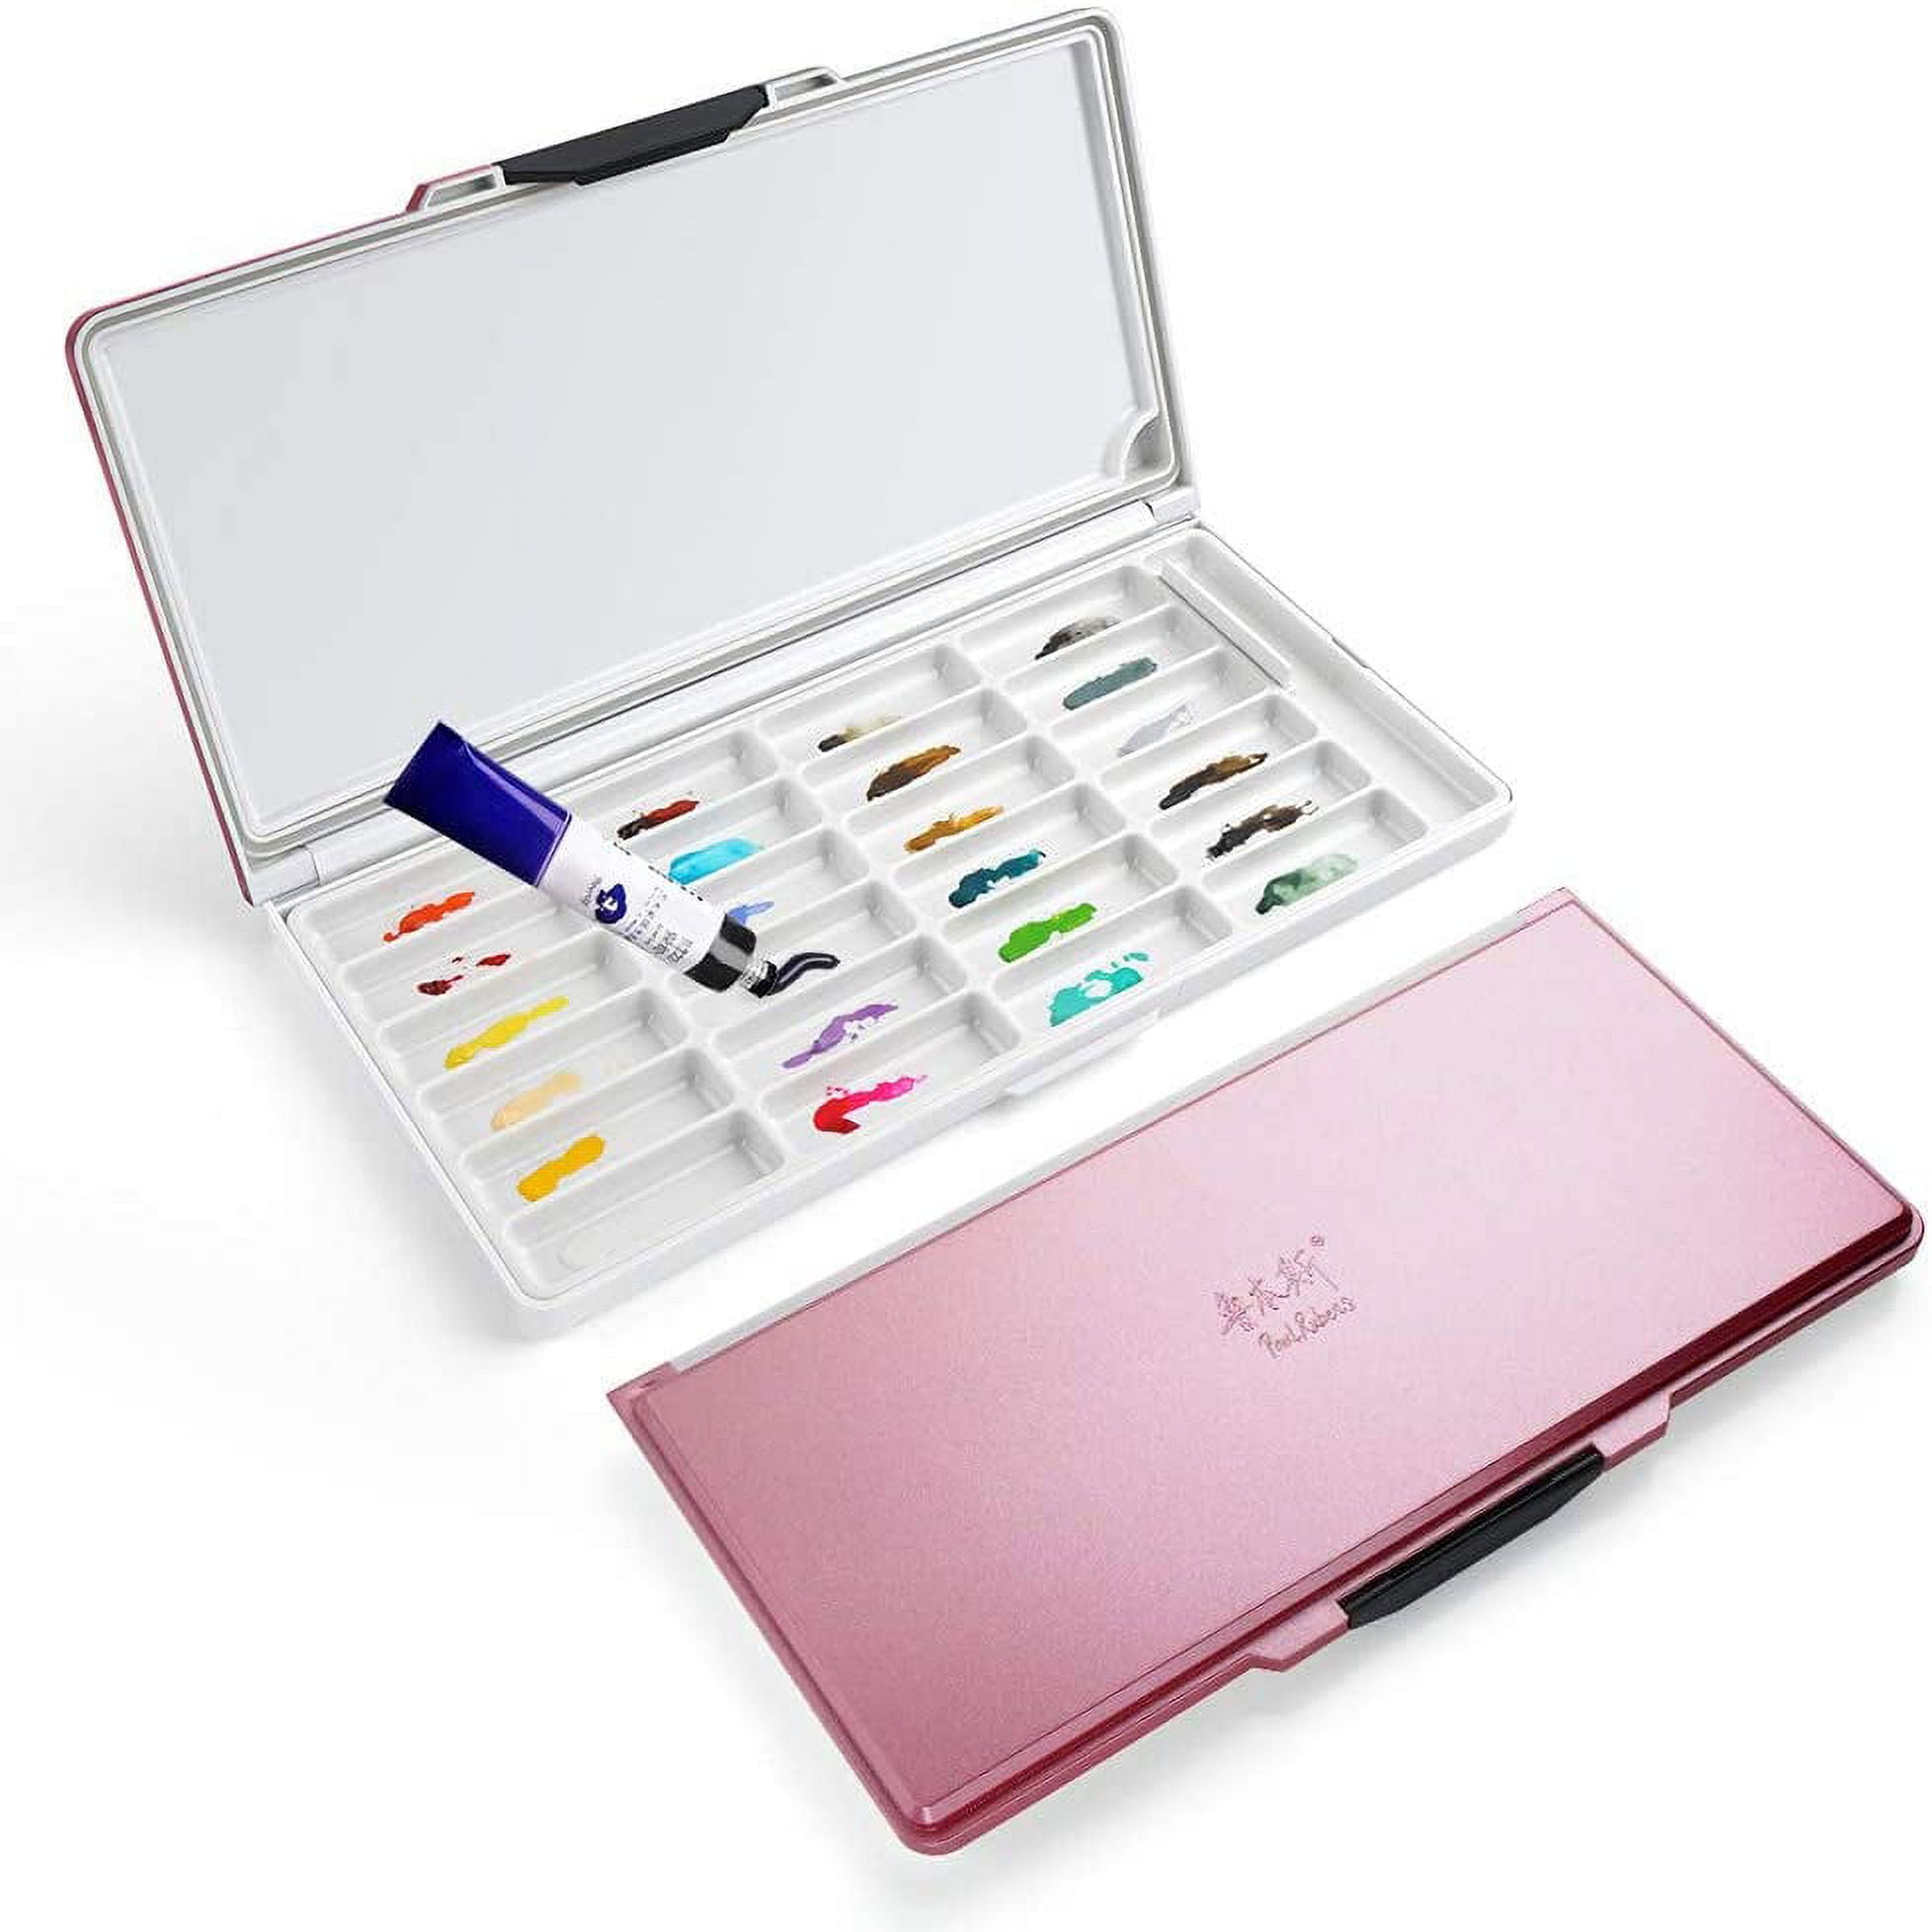 Paul Rubens Watercolor Palette, 24 Wells with 2 Types Paint Tray for Paints  Storage and Mixing Colors, Large and Deep, Suitable for Watercolor,  Acrylic, Gouache, Oil Paint (Pink) 